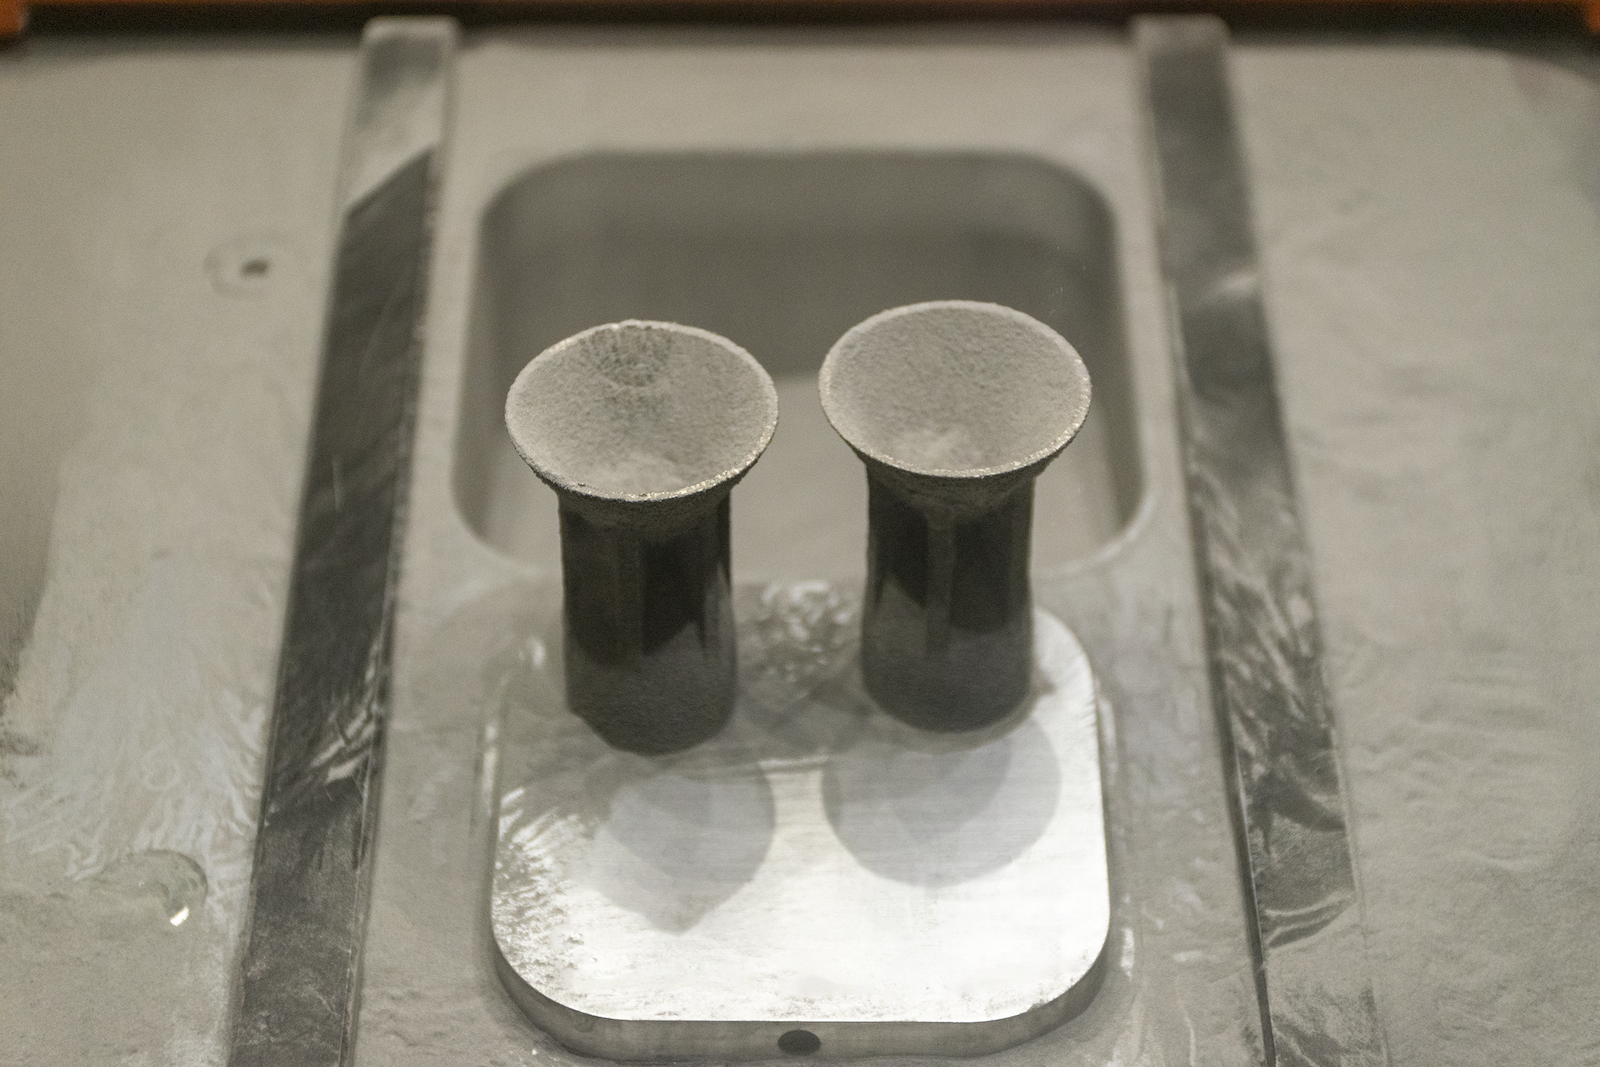 Additive manufacturing with 7A77.60L aluminum alloy: Micro-thrusters prior to full powder removal.